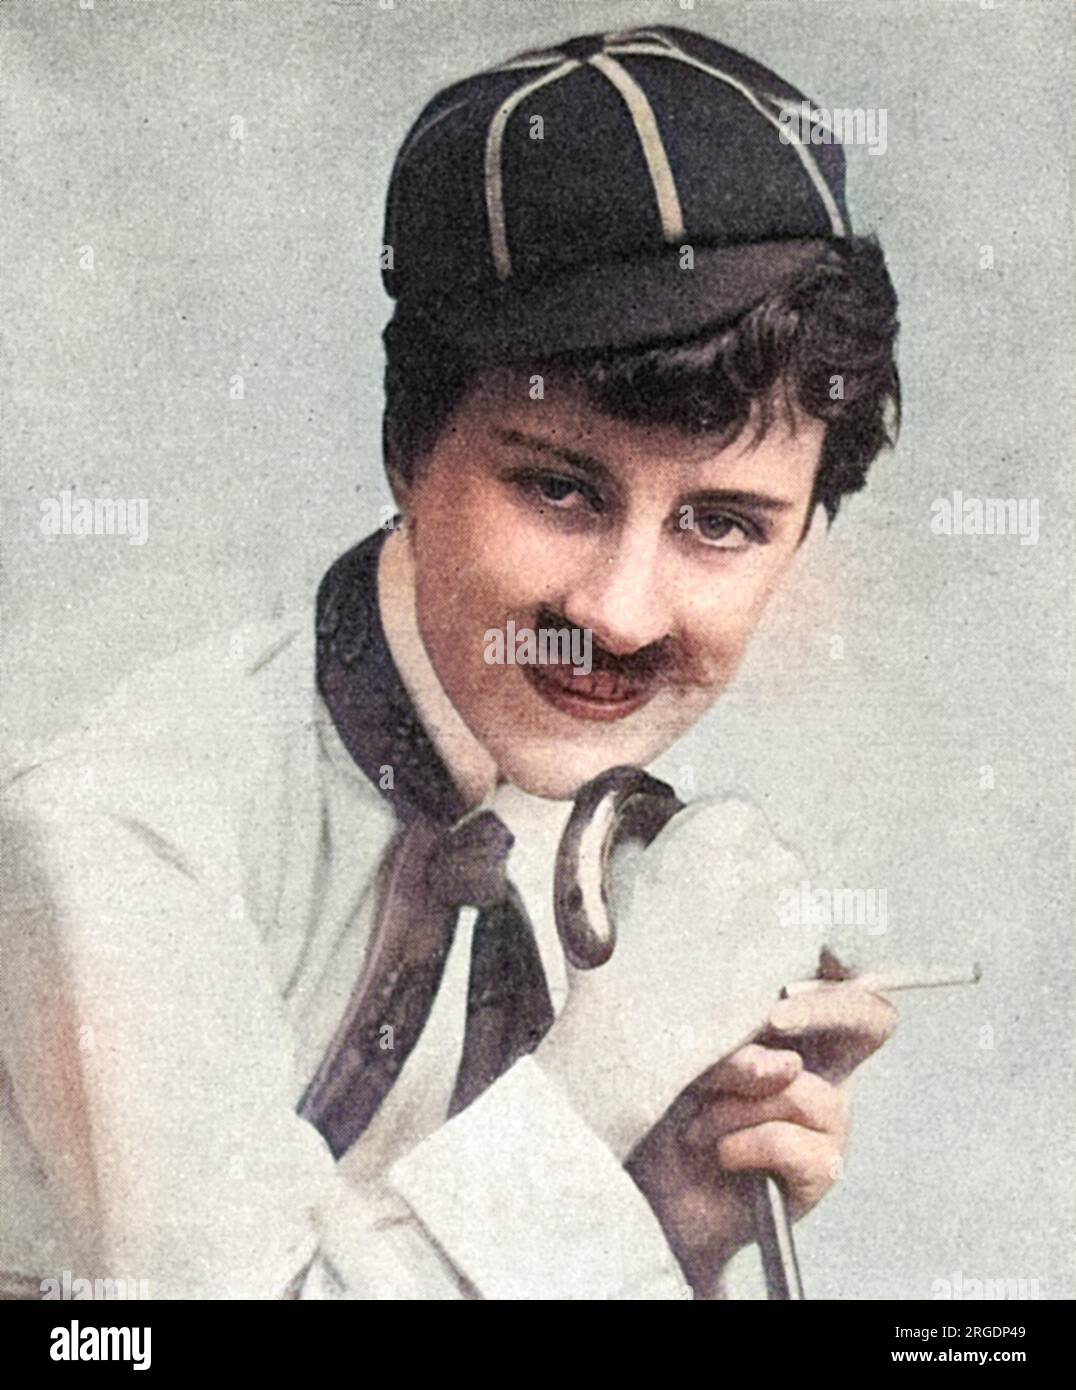 Beatrice Lillie (1894 - 1989) British actress, later Lady Peel after she married Robert ('Bobbie') Peel, who succeeded to his father's baronetcy in 1925.  Pictured early in her career dressed up as Charlie Chaplin, the 'Cinema King' in the new Vaudeville revue, Tabs. Stock Photo